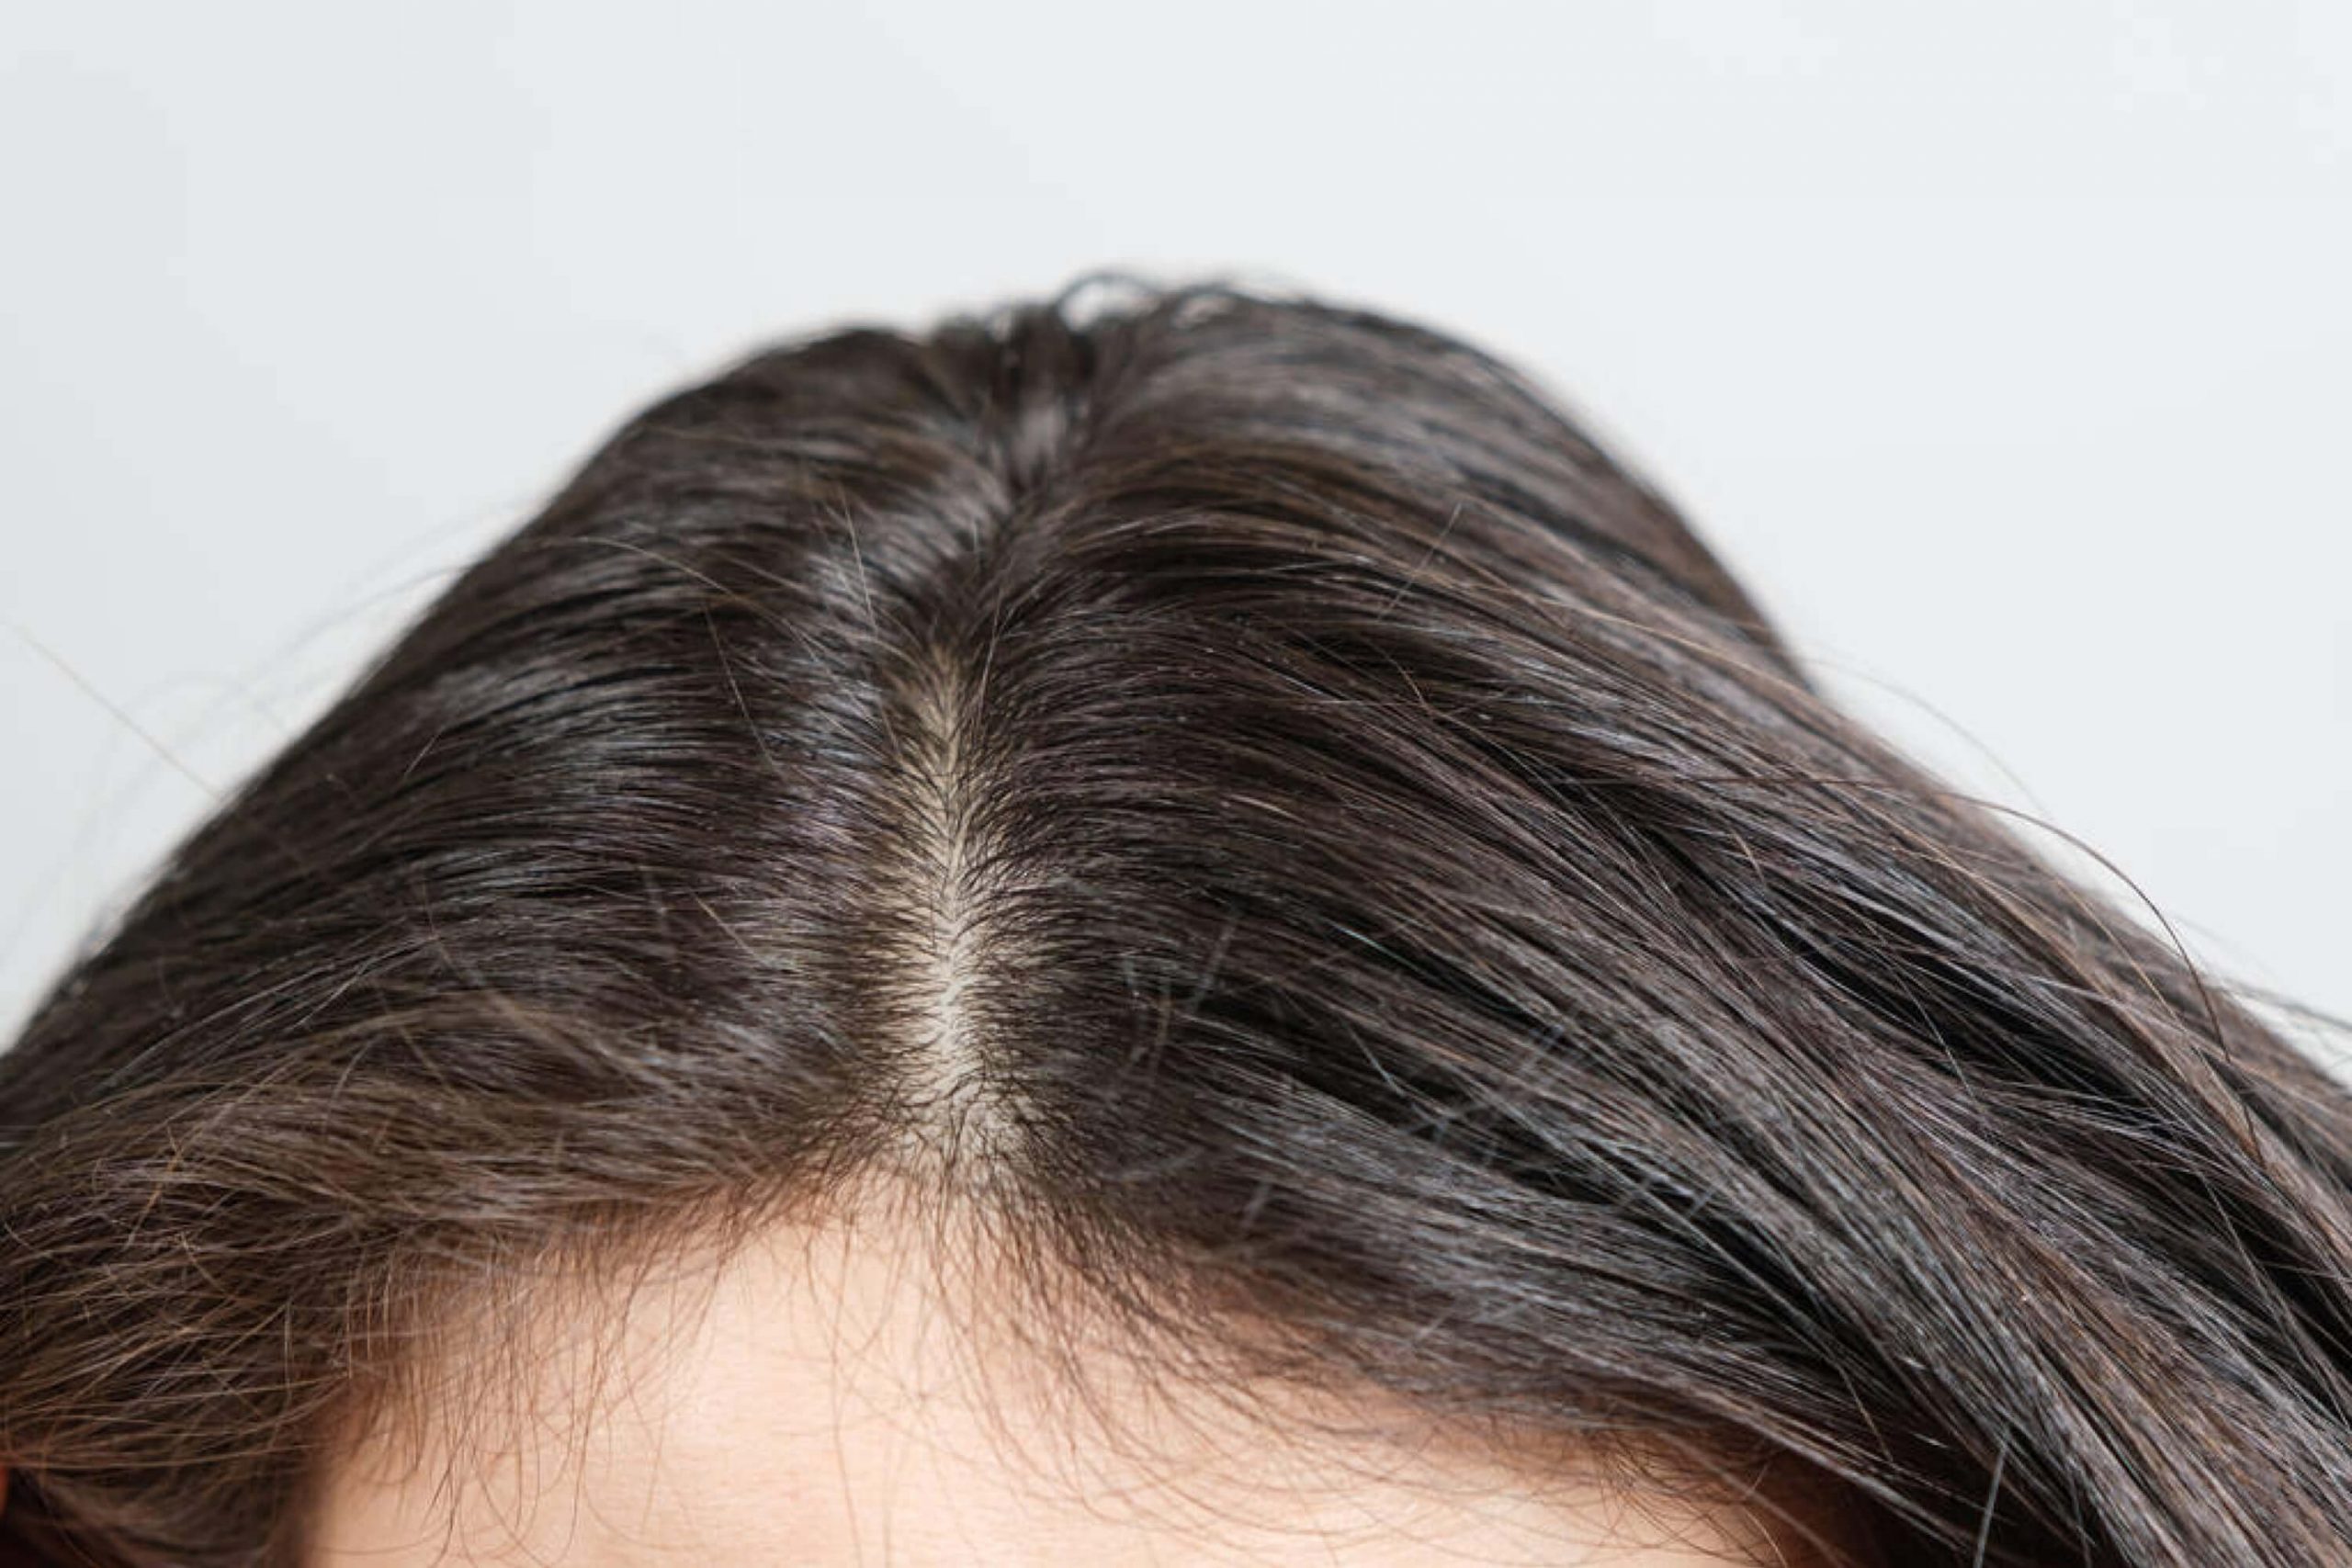 How to Make Your Hair Not Greasy Overnight? - Beezzly